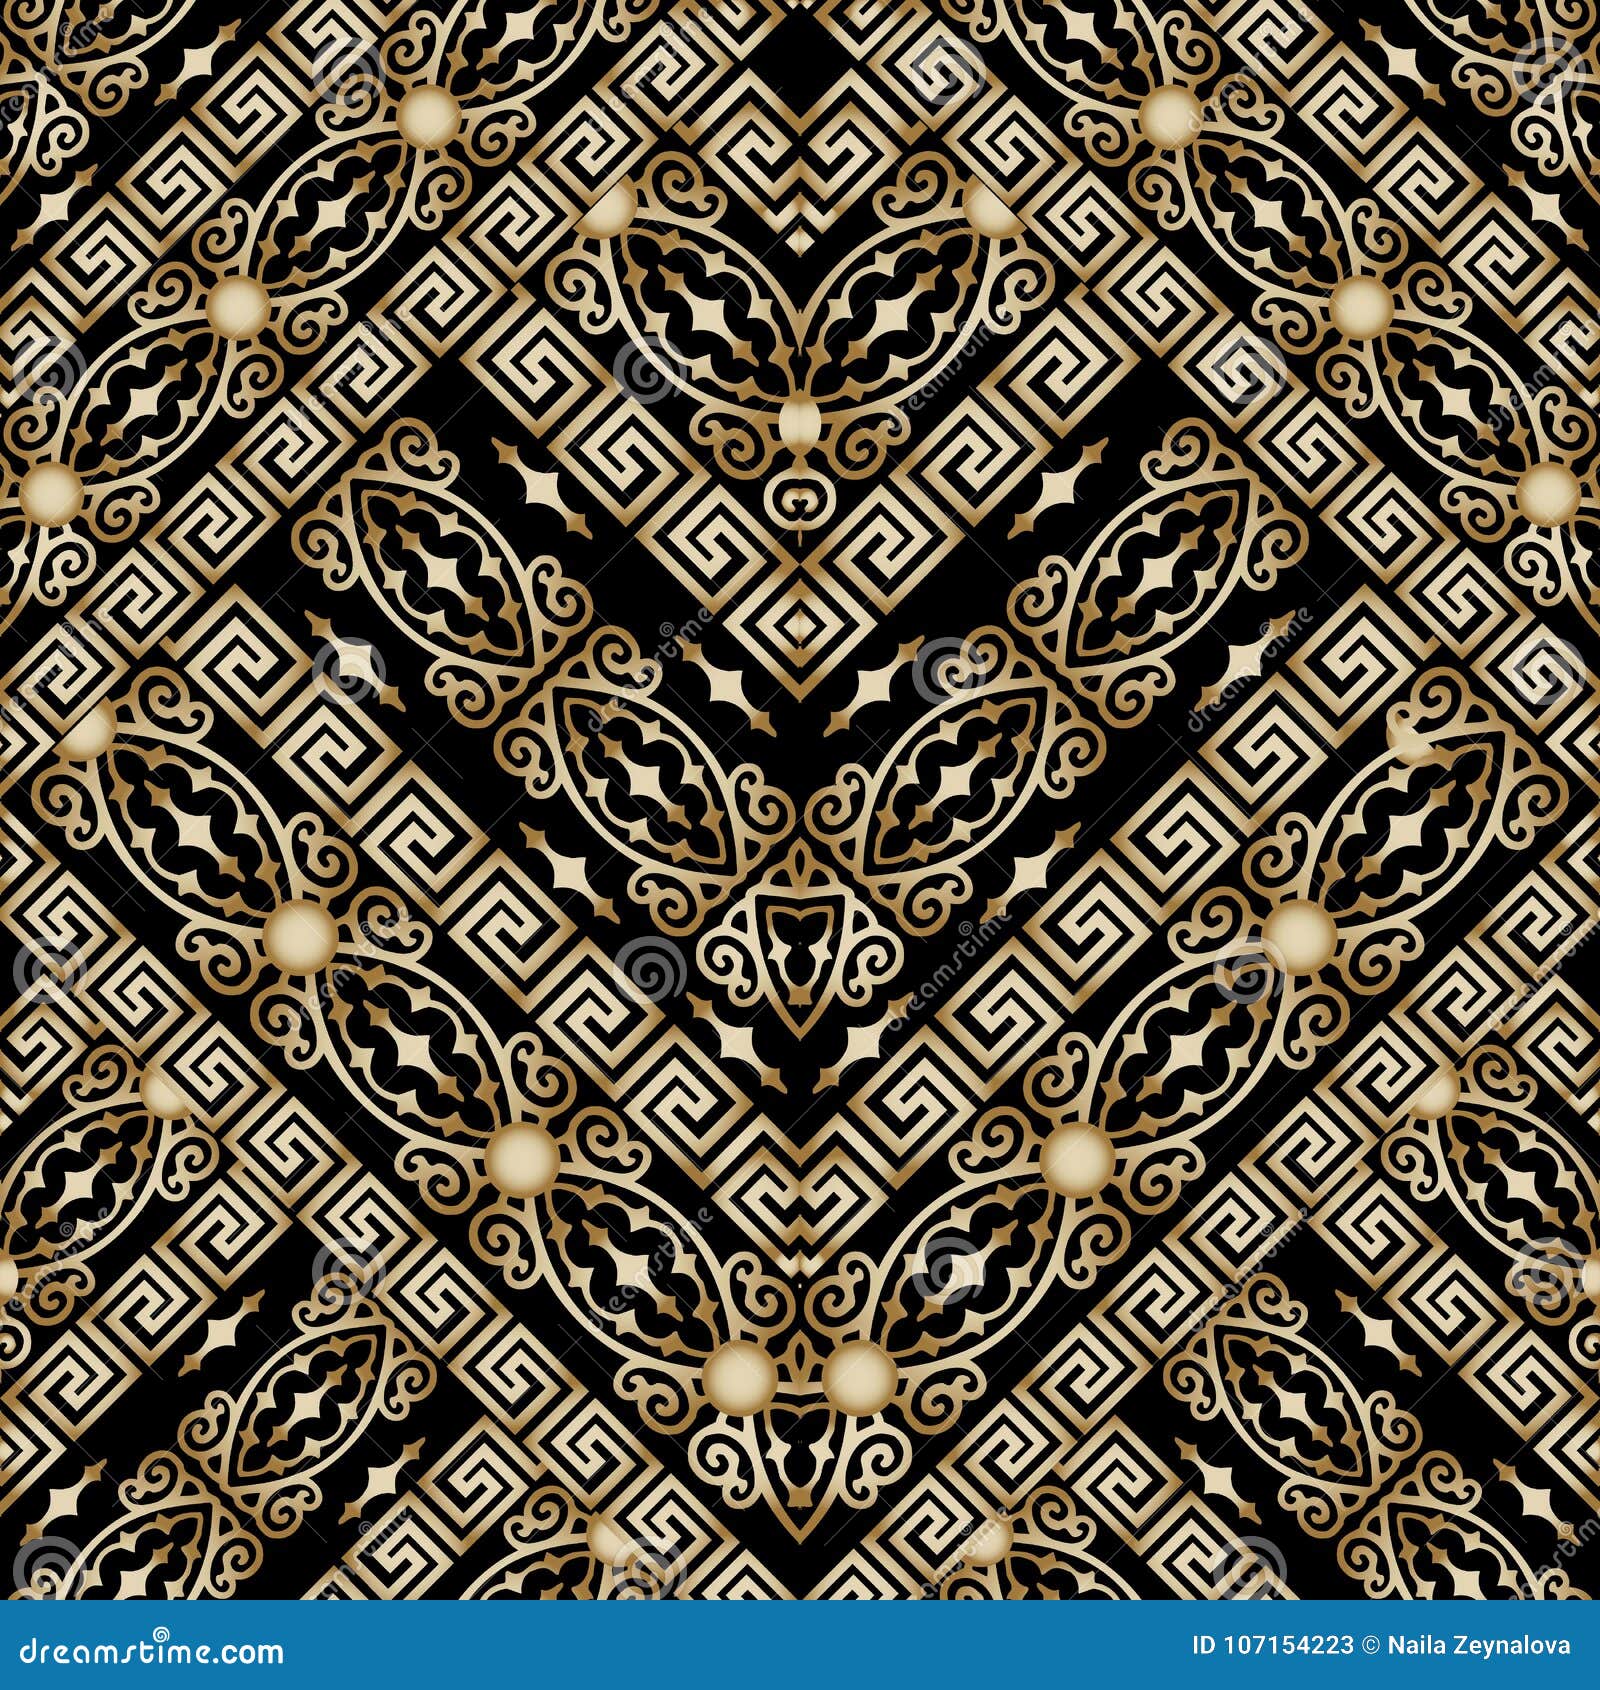 Baroque Seamless Pattern. Vector Floral Background with Geometric ...